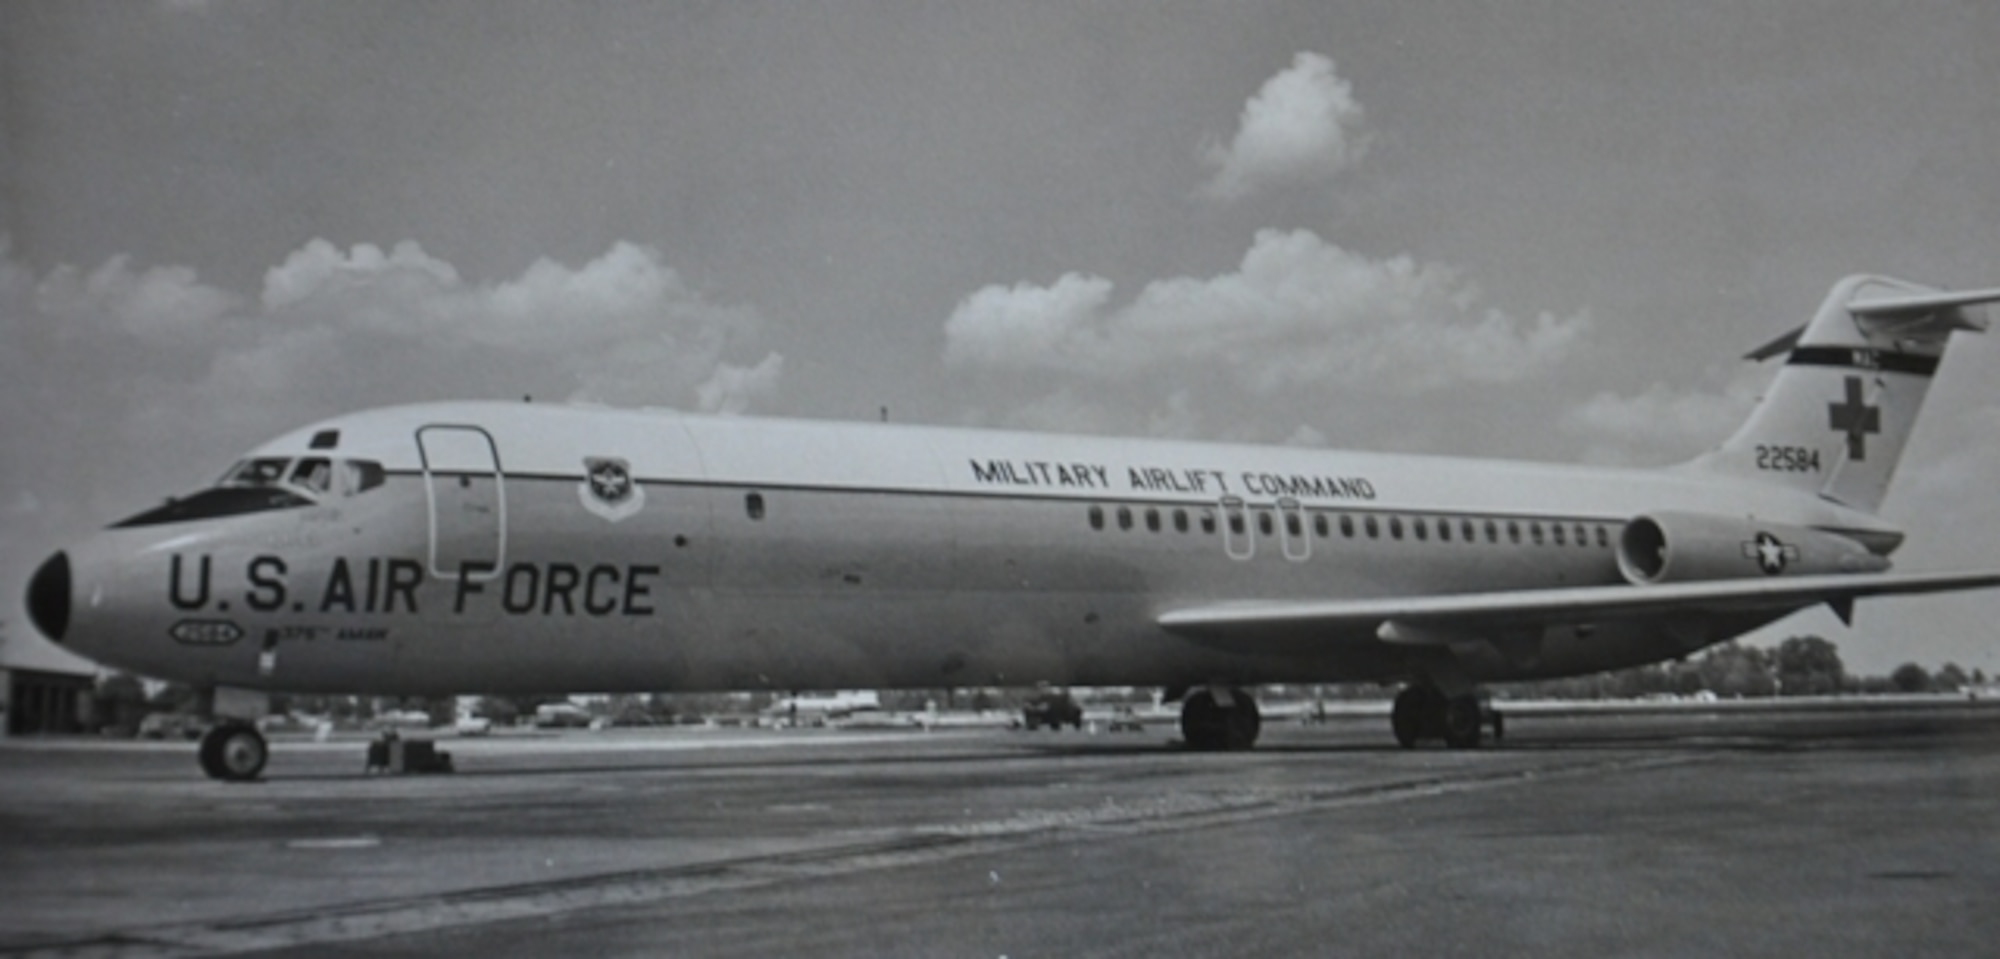 C-9 Nightingale, 1968-2003: In 1968, MAC activated a new 1400th Air Base Wing to take over host wing responsibility for Scott AFB. This allowed the 375th to focus more on its aeromedical airlift mission—a mission that was expanding through the addition of new medical transport aircraft, C-9A Nightingales. The new C-9A Nightingale was equipped with an assortment of important medical capabilities, but one of its most significant new features was its increased speed and range over existing medical transports.